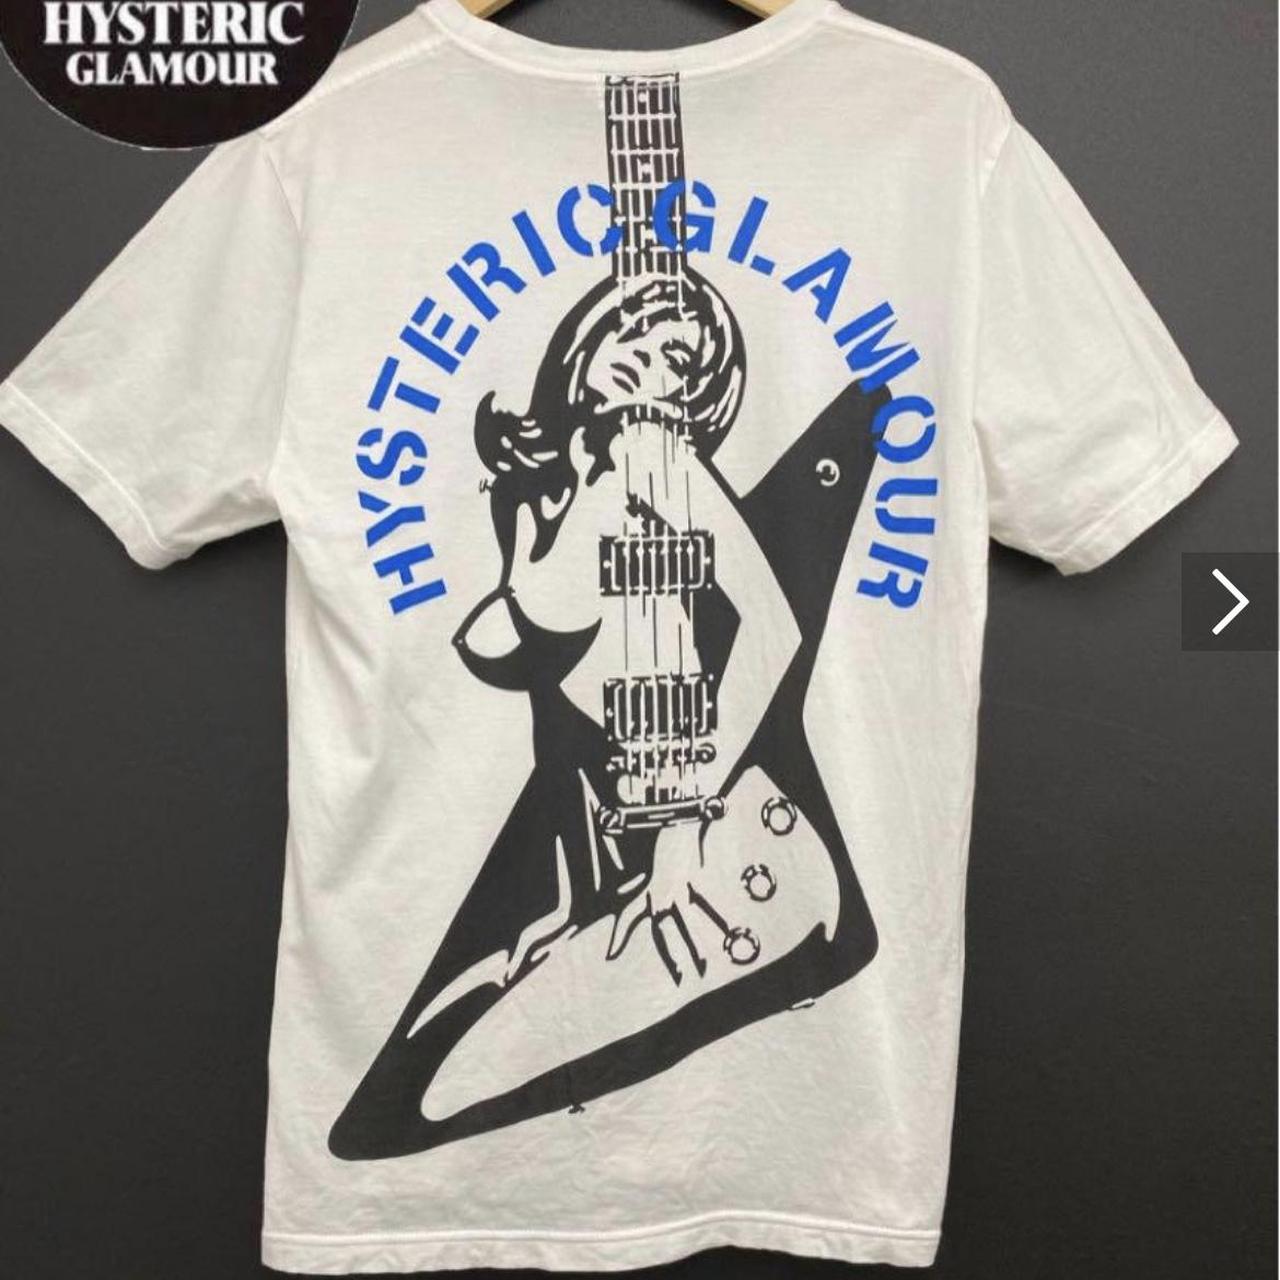 Women Guitar Graphic Hysteric Glamour...